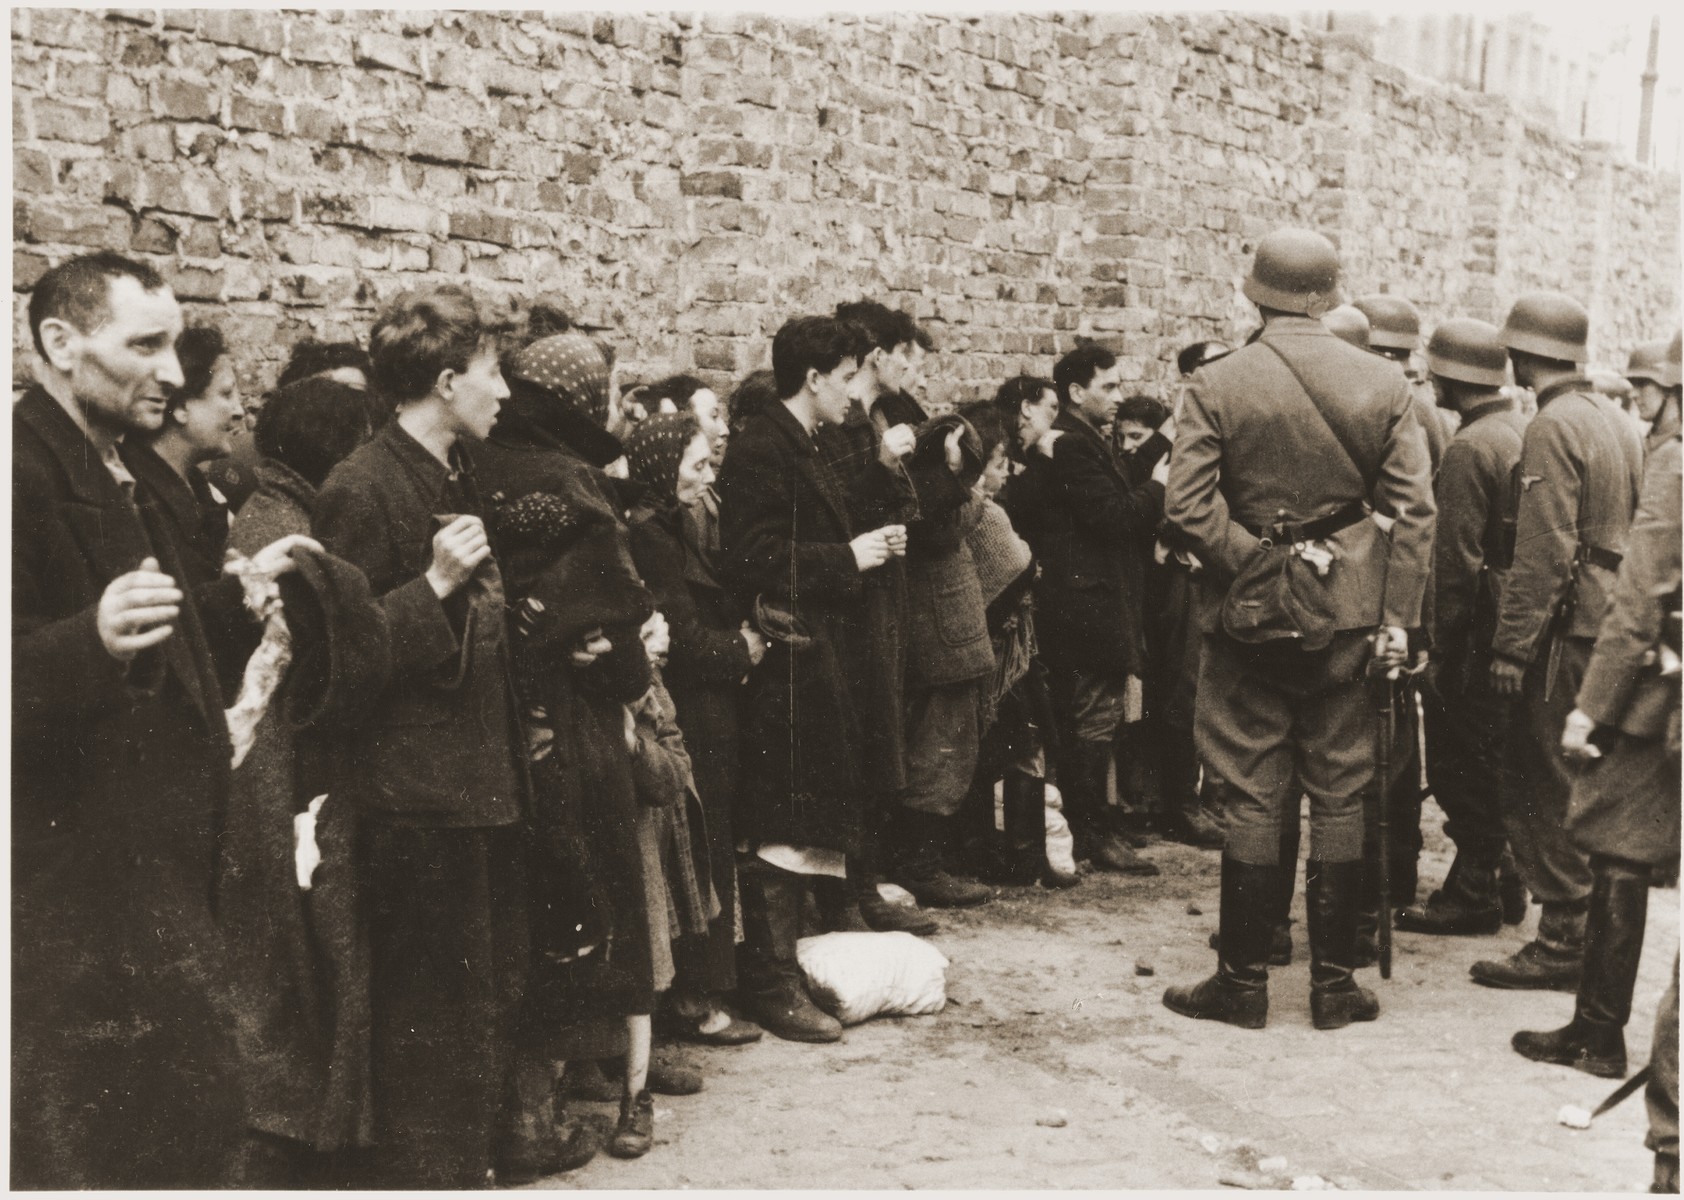 Jews captured by the SS during the Warsaw ghetto uprising are interrogated beside the ghetto wall before being sent to the Umschlagplatz.  The original German caption reads: "Search and Interrogation."